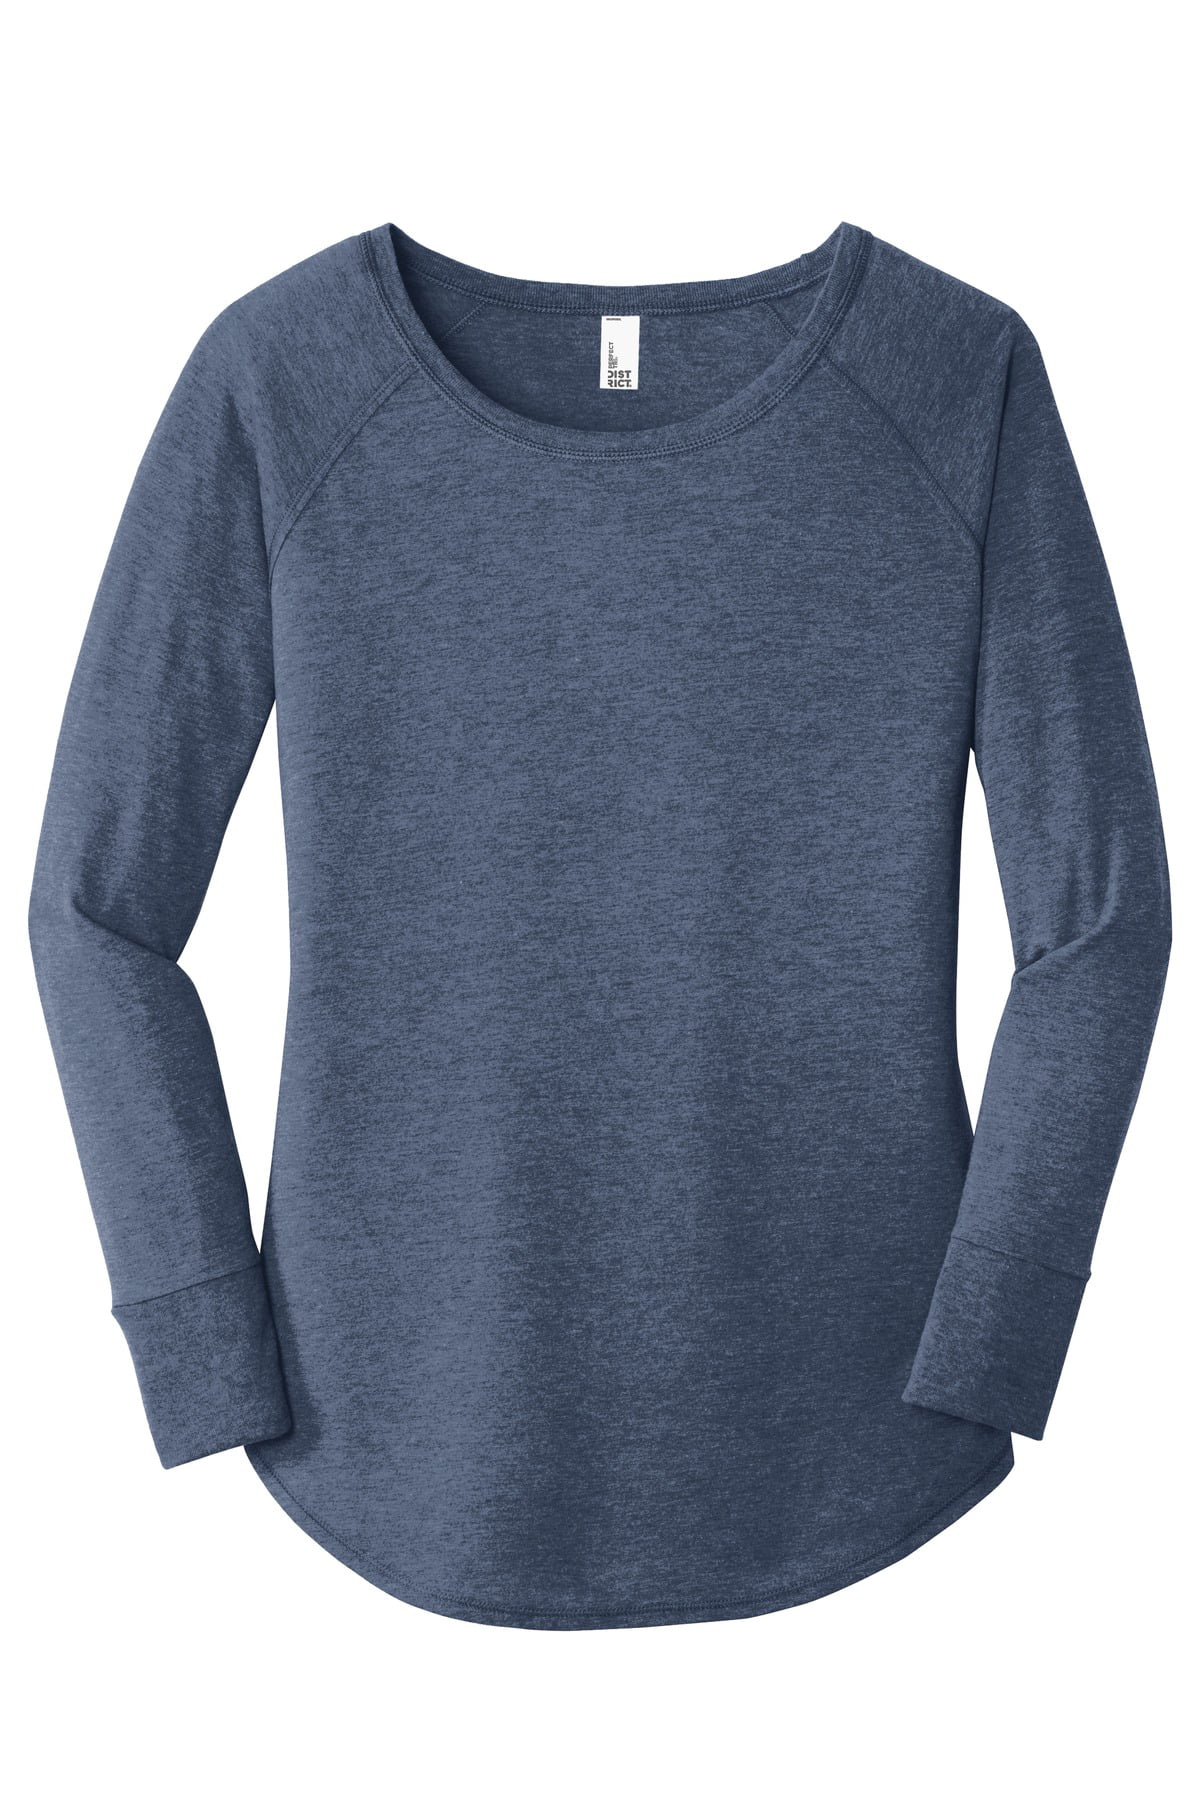 District Women's Perfect Tri Long Sleeve Tunic Tee Dt132l - Grey Frost - XS  